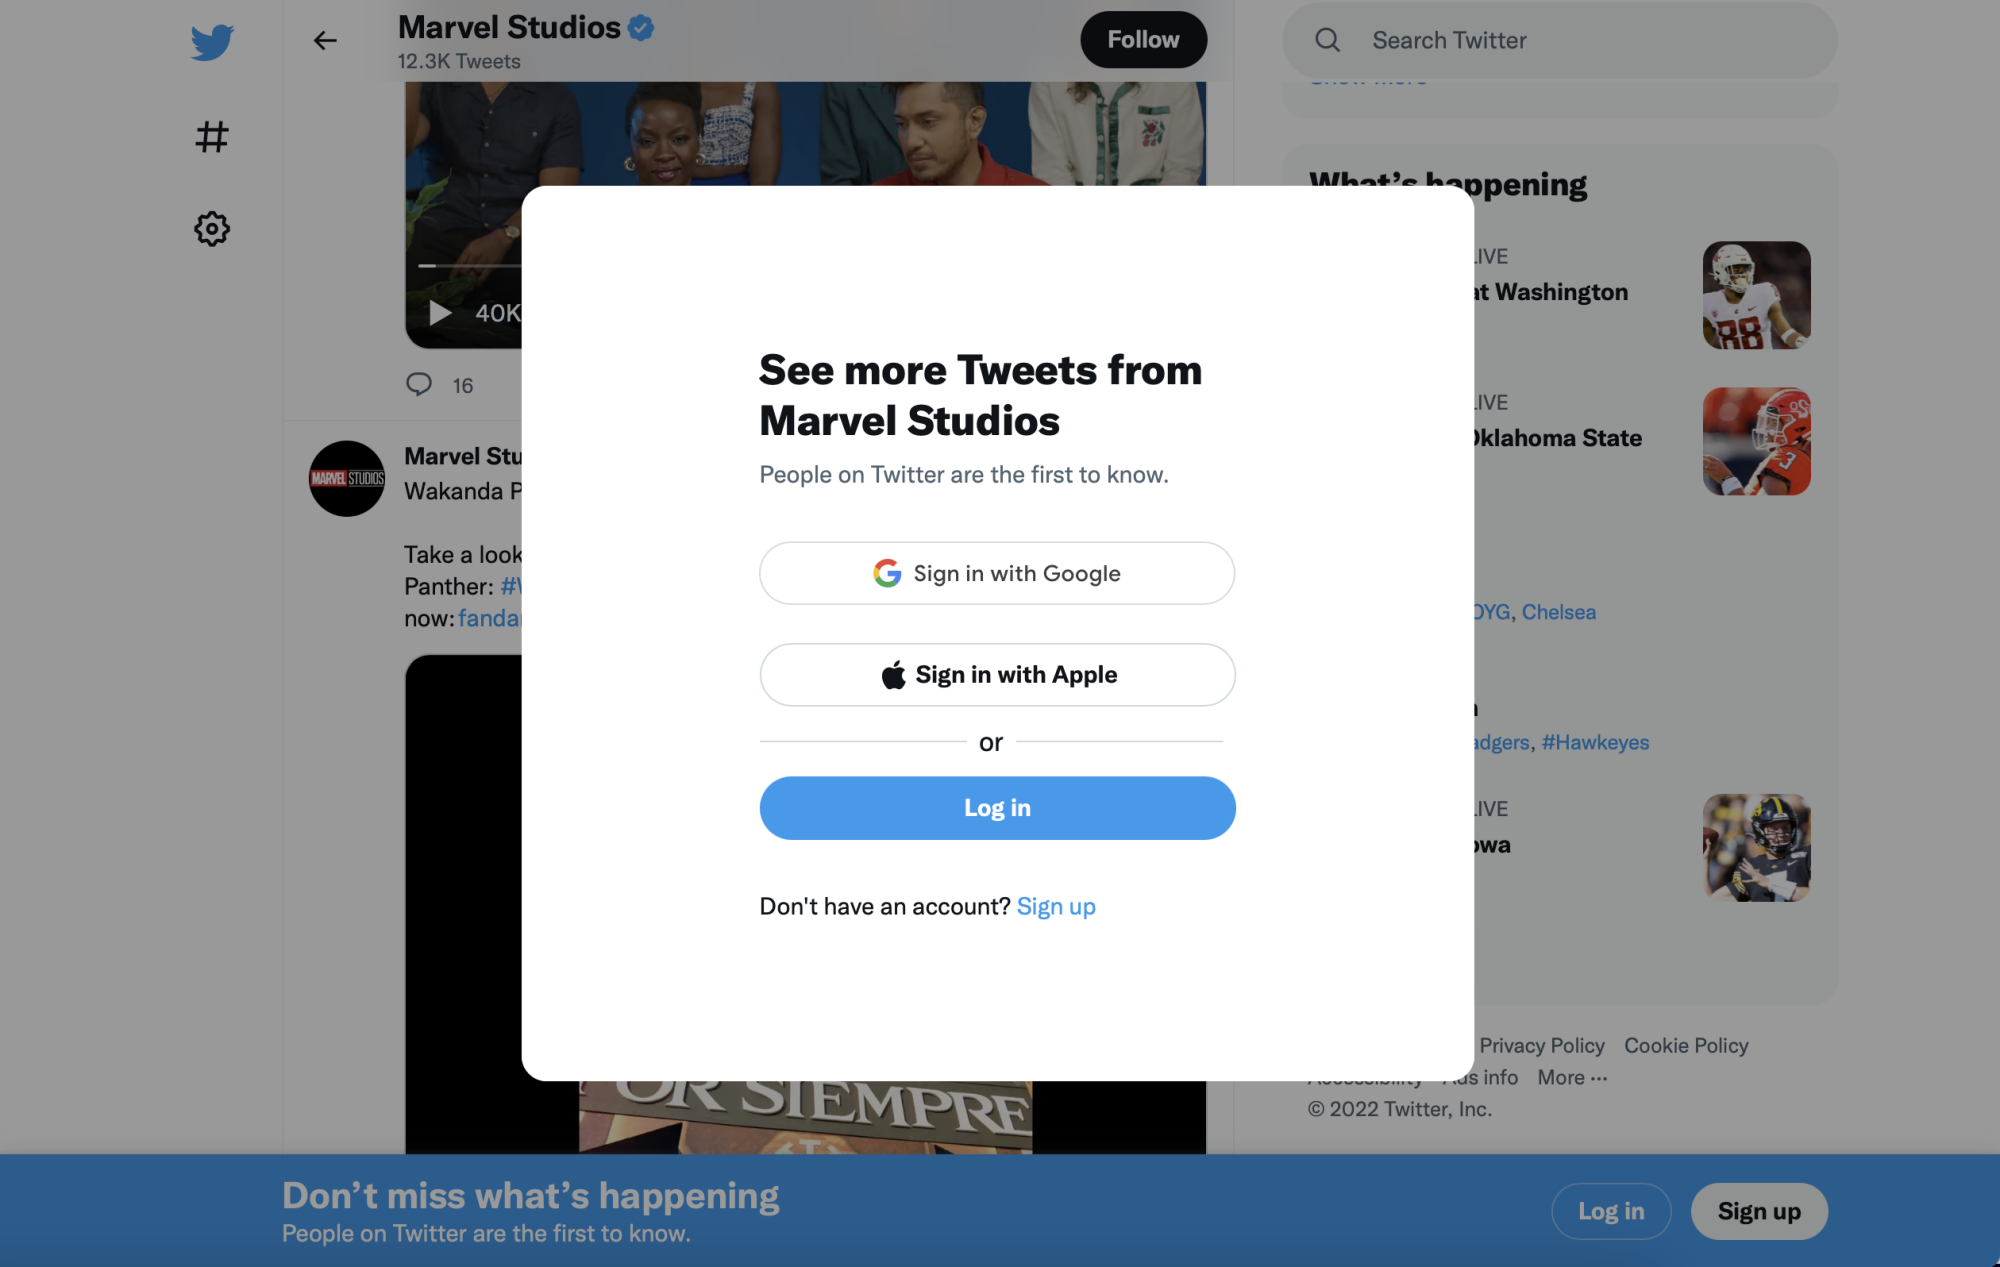 A popup urging the user to log into Twitter or create an account